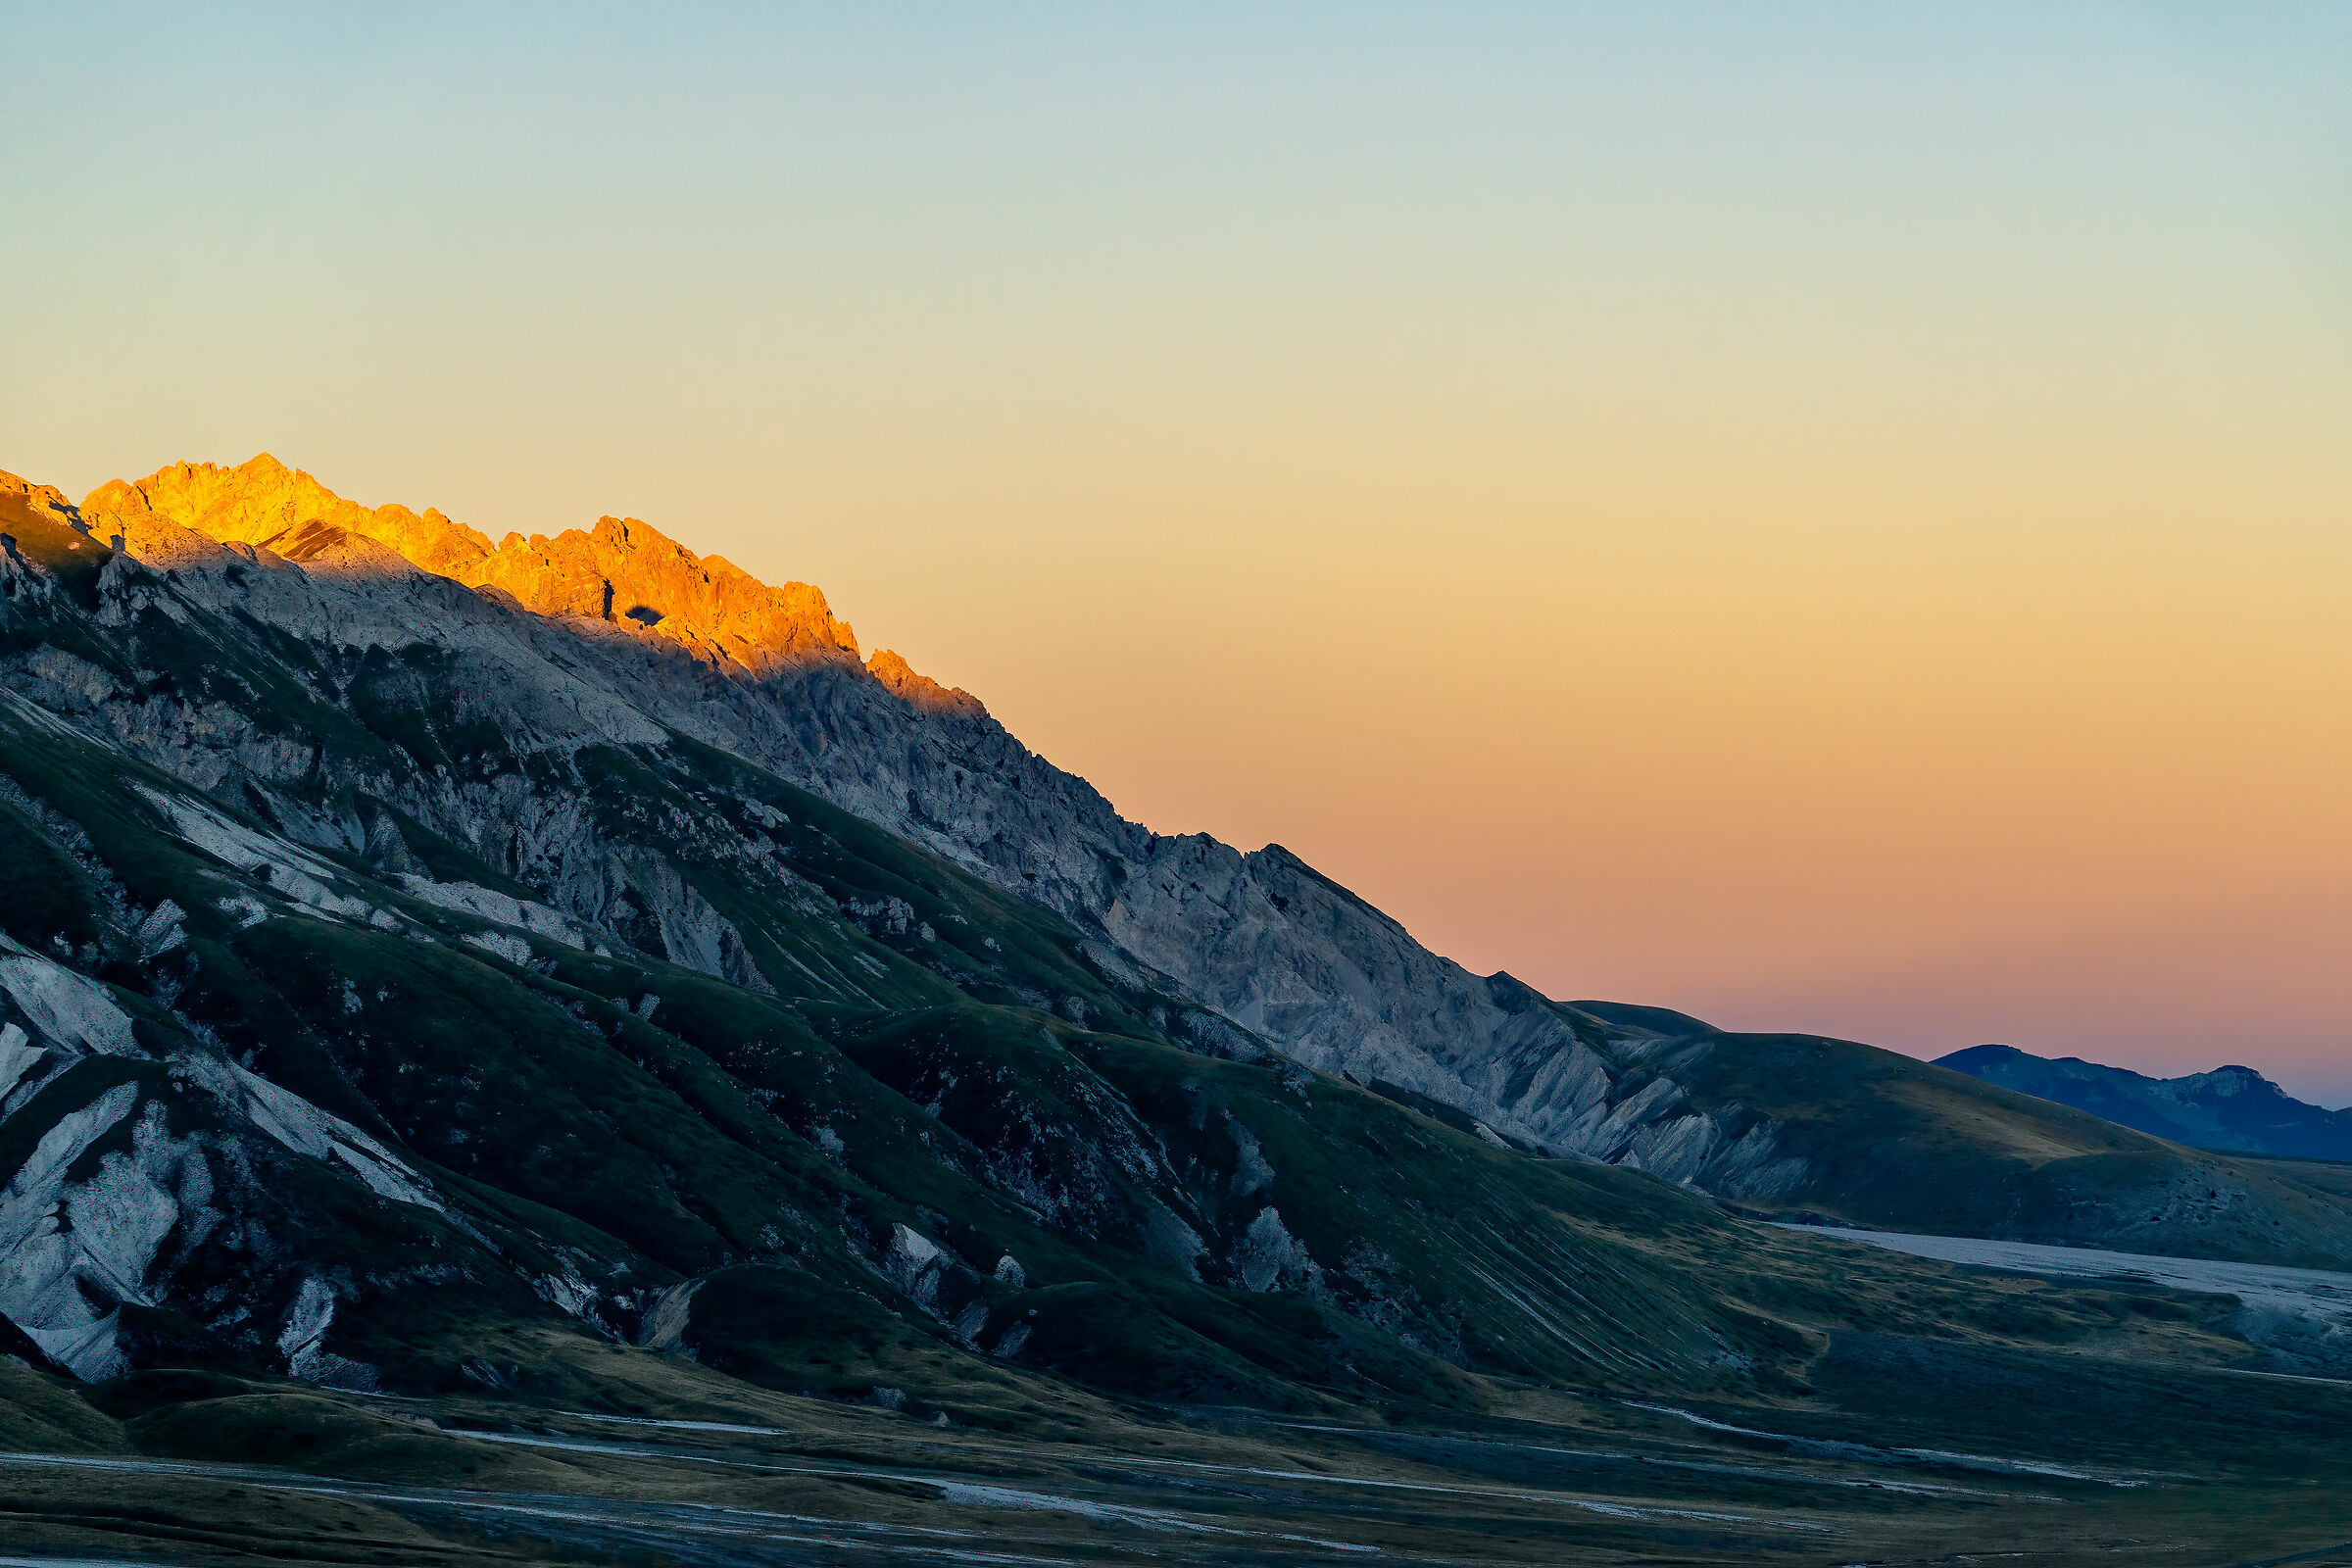 Sunset at Campo Imperatore...